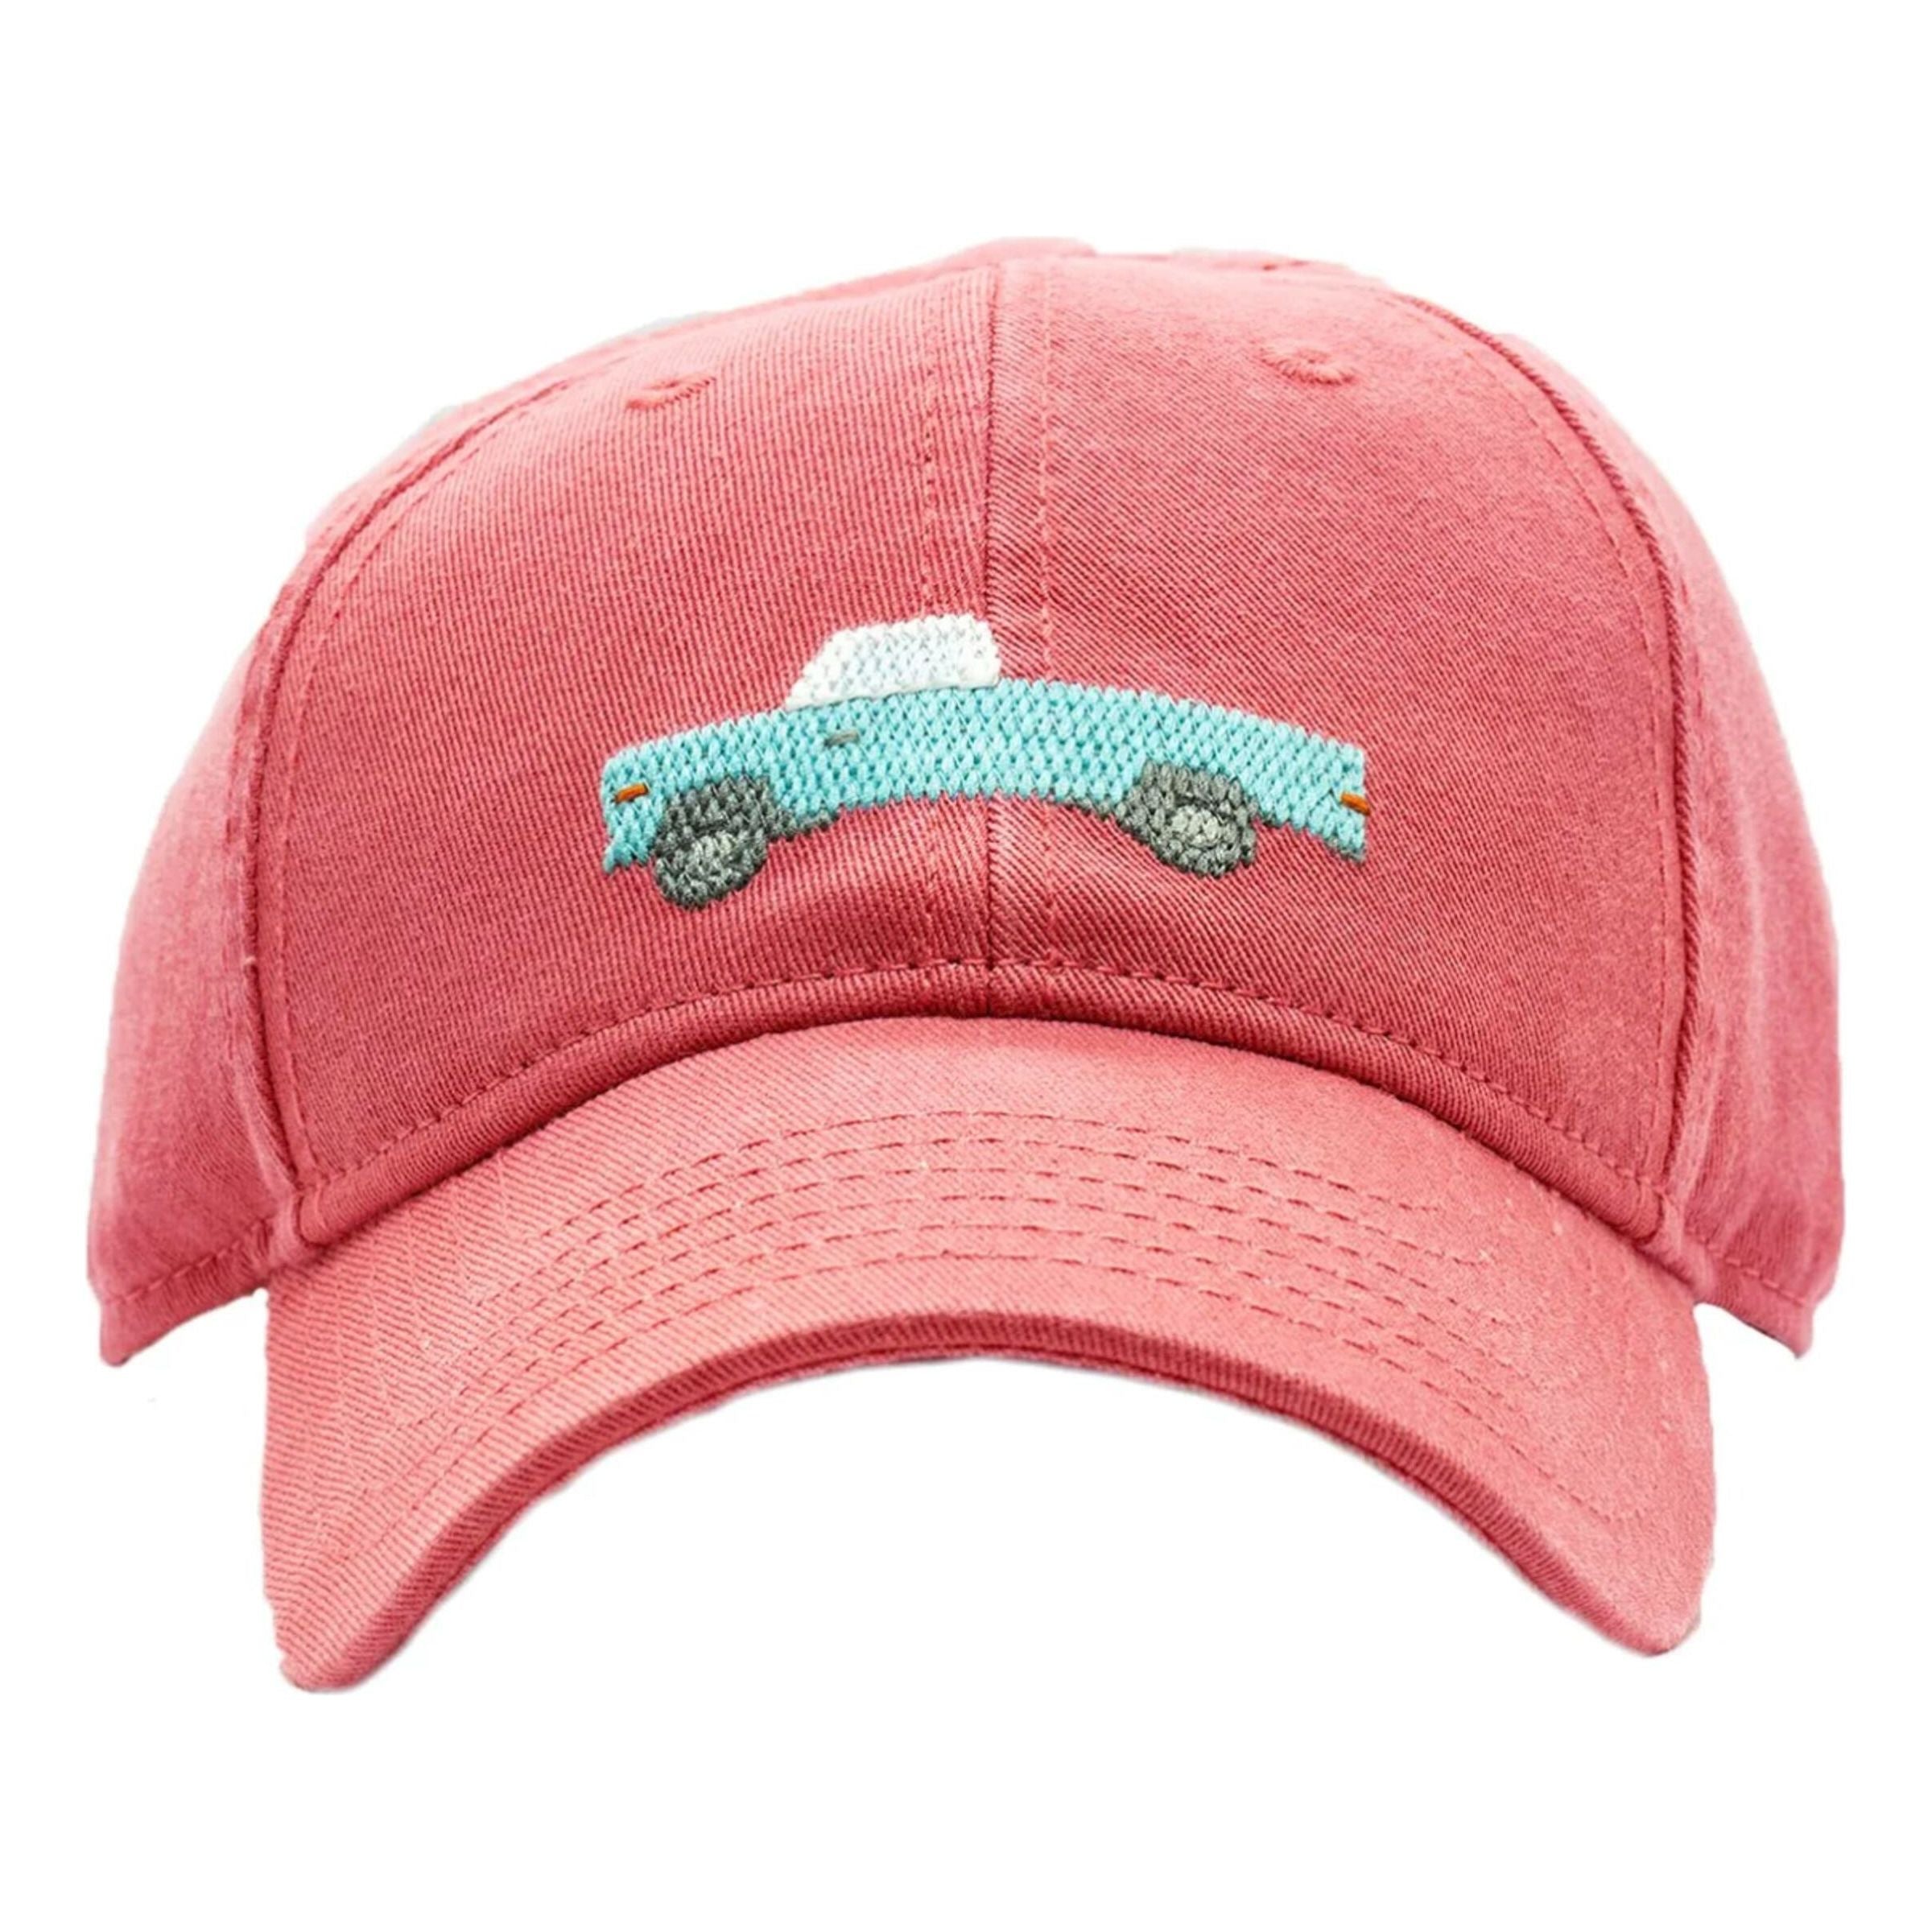 Baseball Hat - Pick Up Truck on New England Red